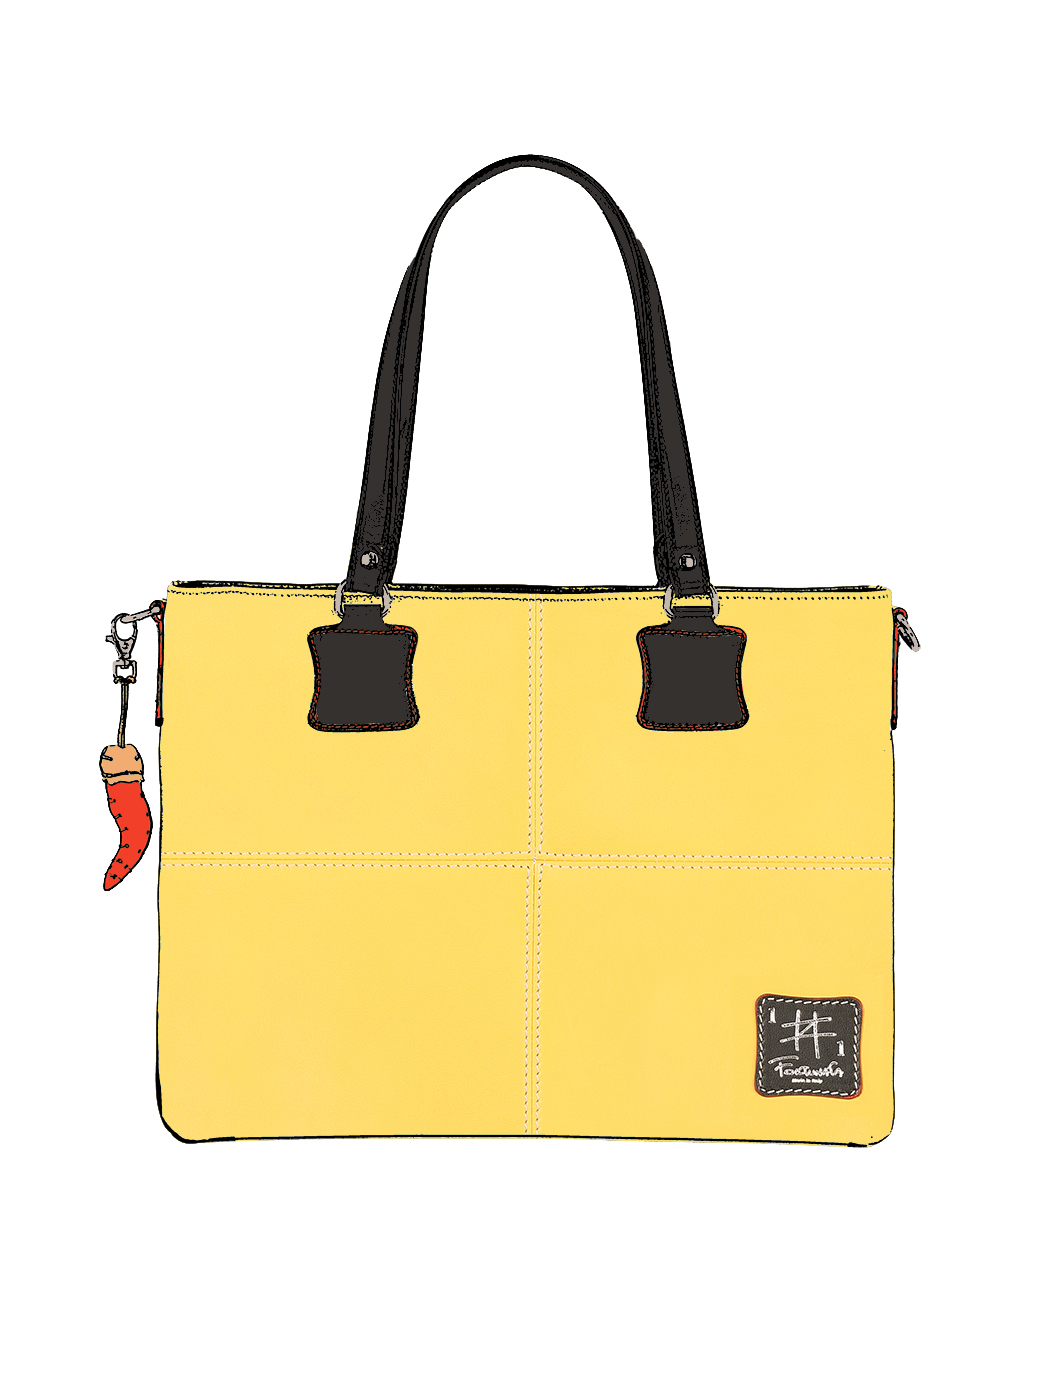 All Leather Shopper Shoulder Tote Bag - Yellow